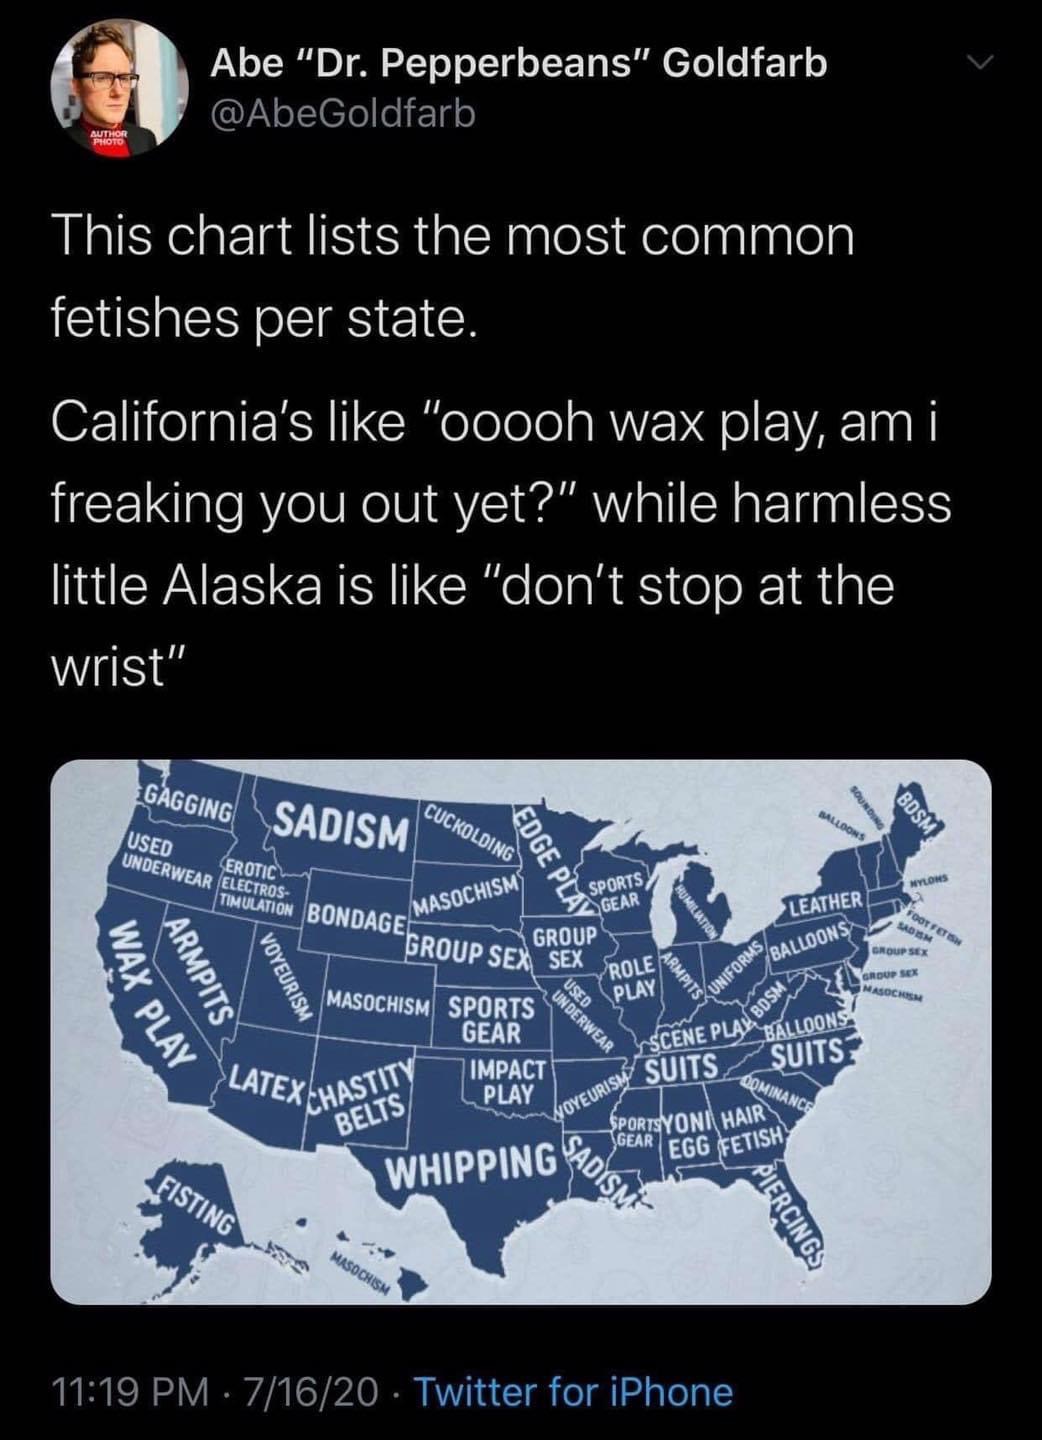 Arms Forms Abe "Dr. Pepperbeans" Goldfarb Author Photo This chart lists the most common fetishes per state. California's "ooooh wax play, am i freaking you out yet?" while harmless little Alaska is "don't stop at the wrist" Gagging Sadism Cuckolding…